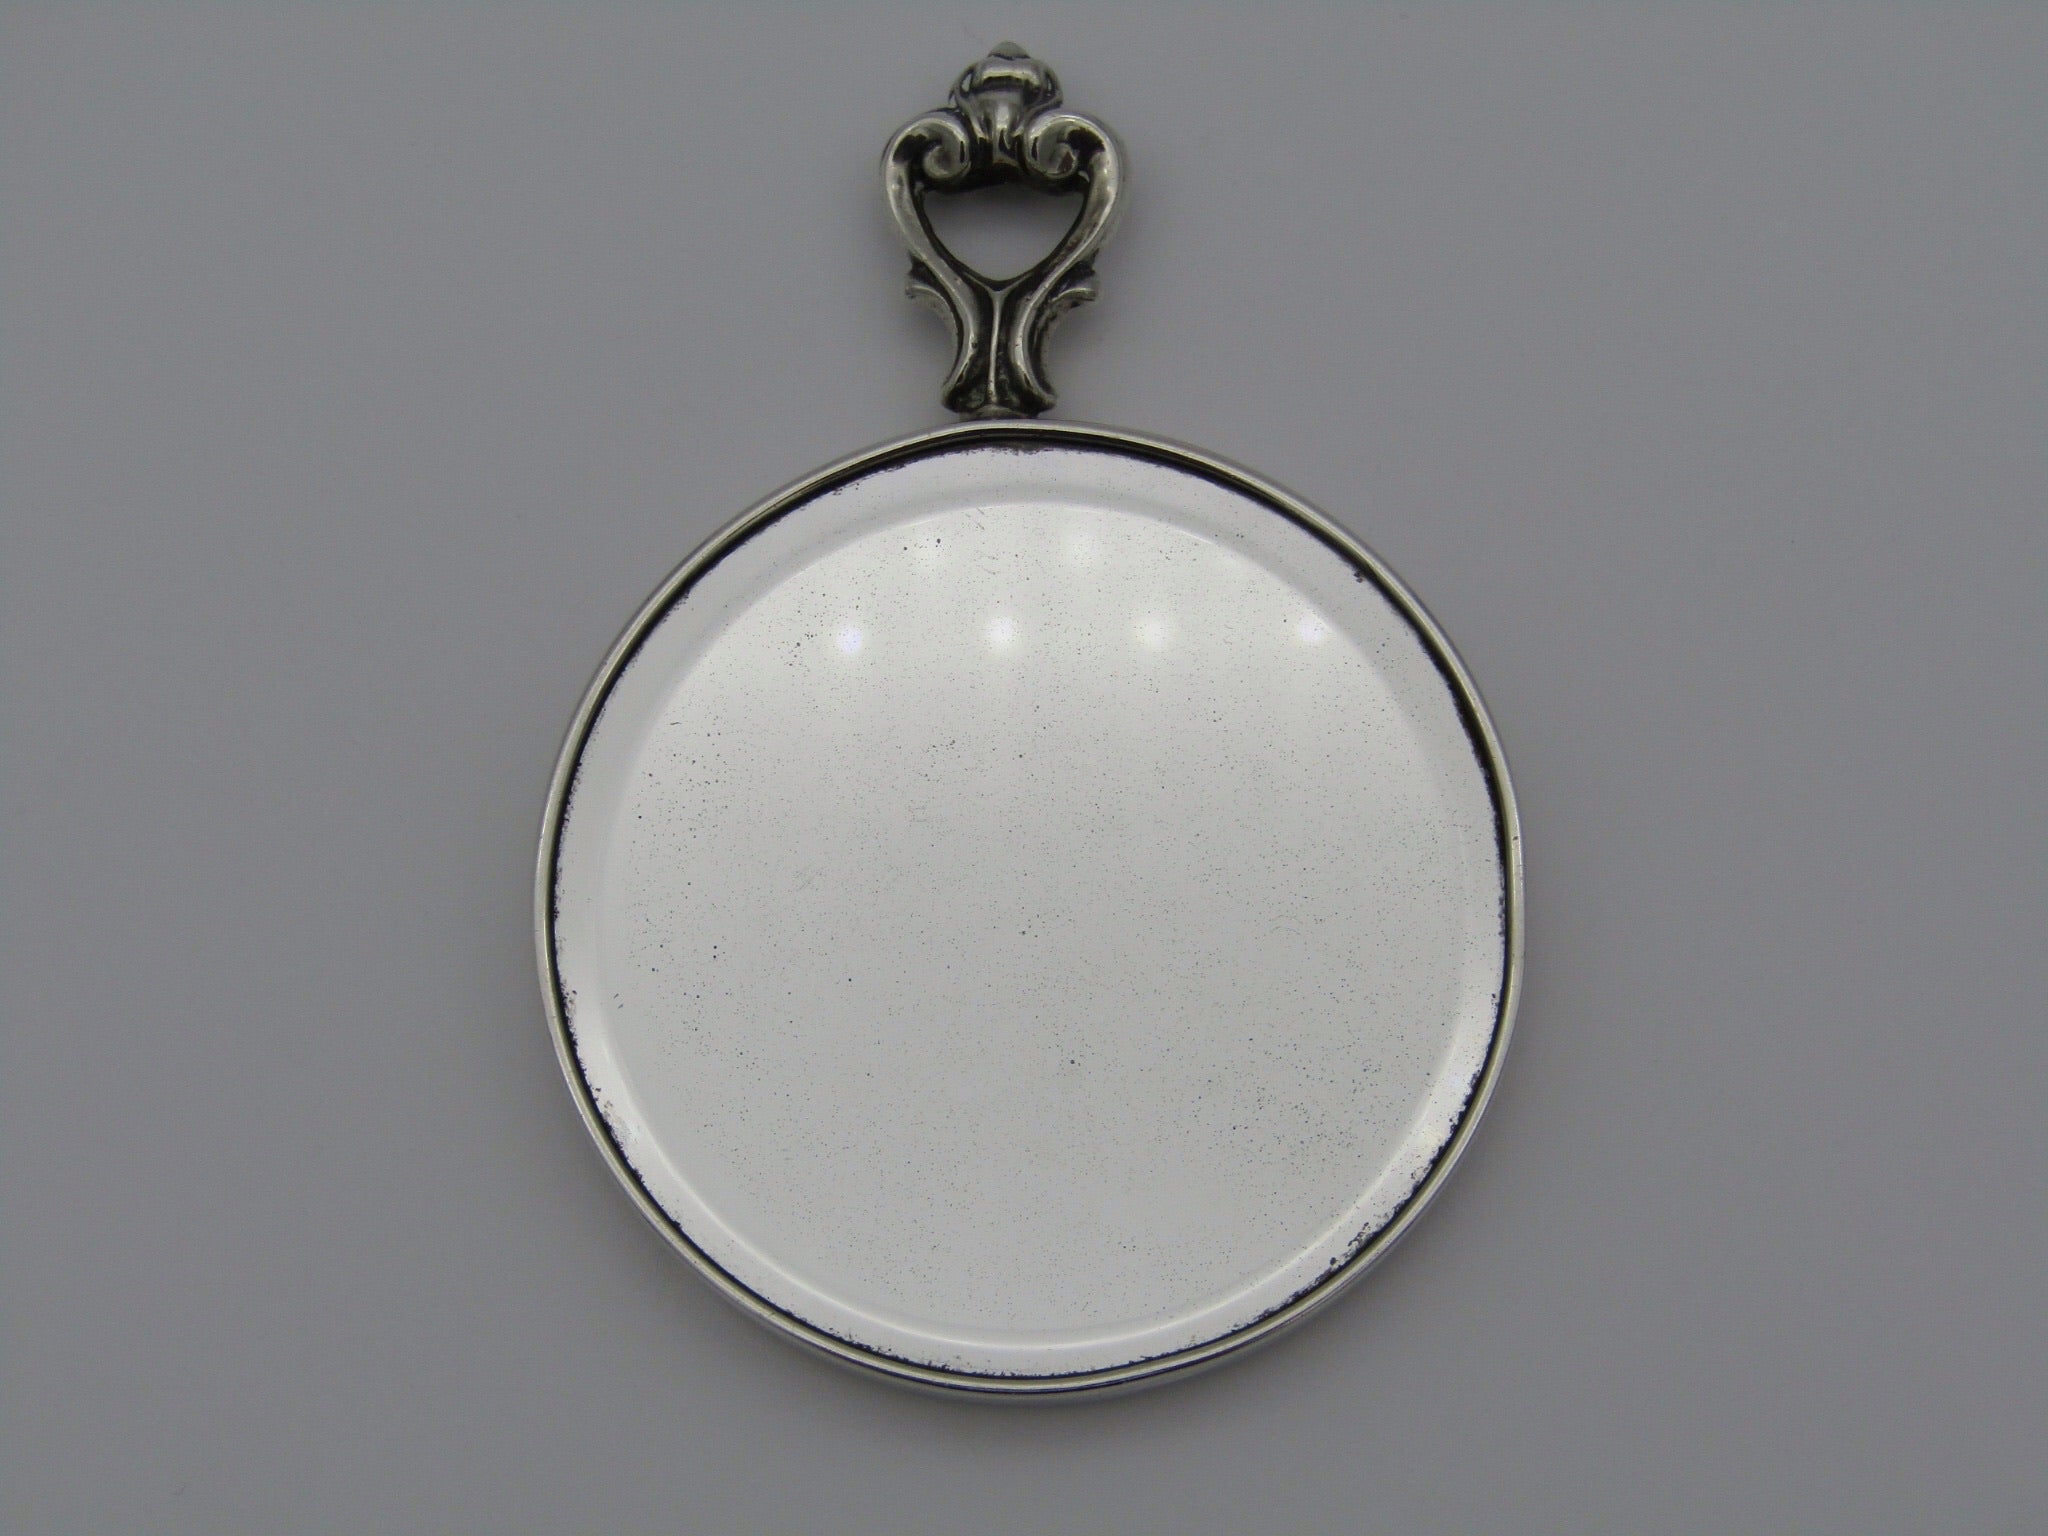 A sterling silver hand mirror by Cartier. Circa 1920s.